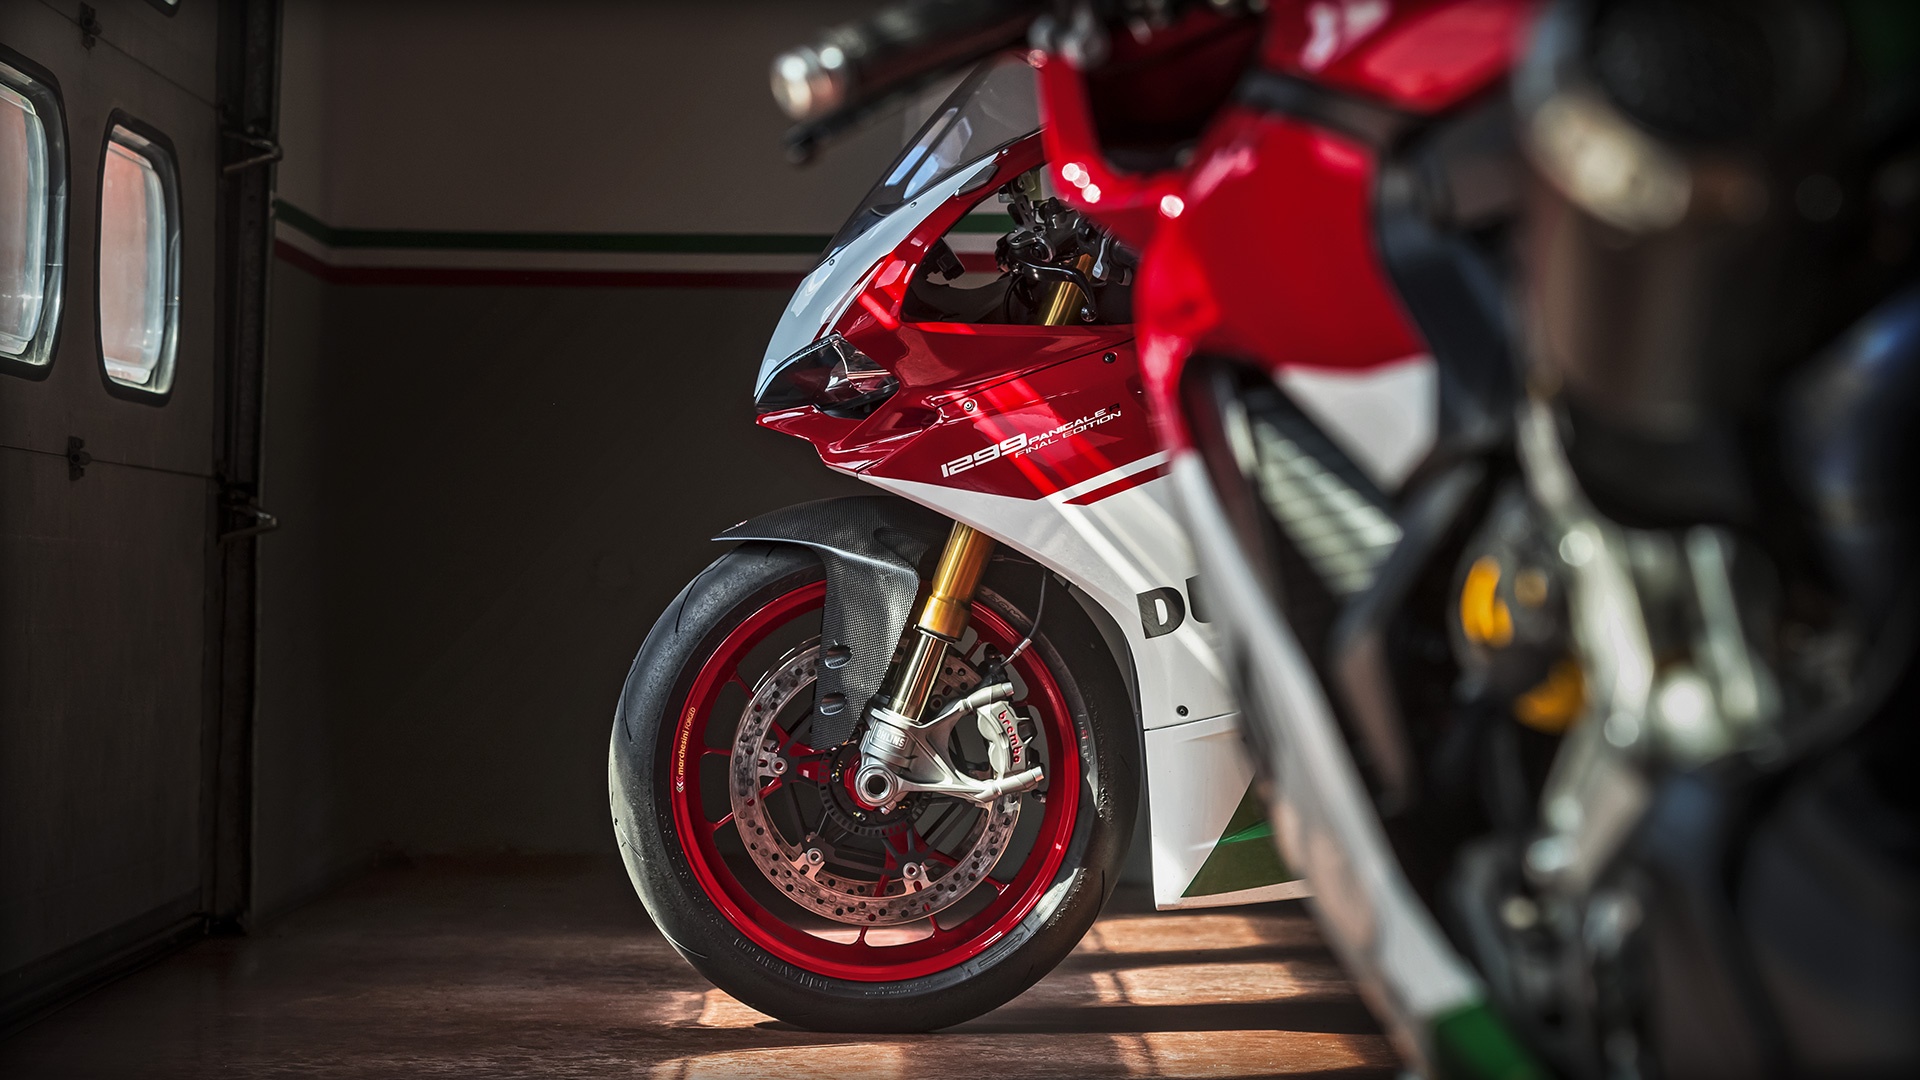 Panigale_Final-Edition_2018_Ambience_FE_01_Gallery_1920x1080.mediagallery_output_image_[1920x1080]